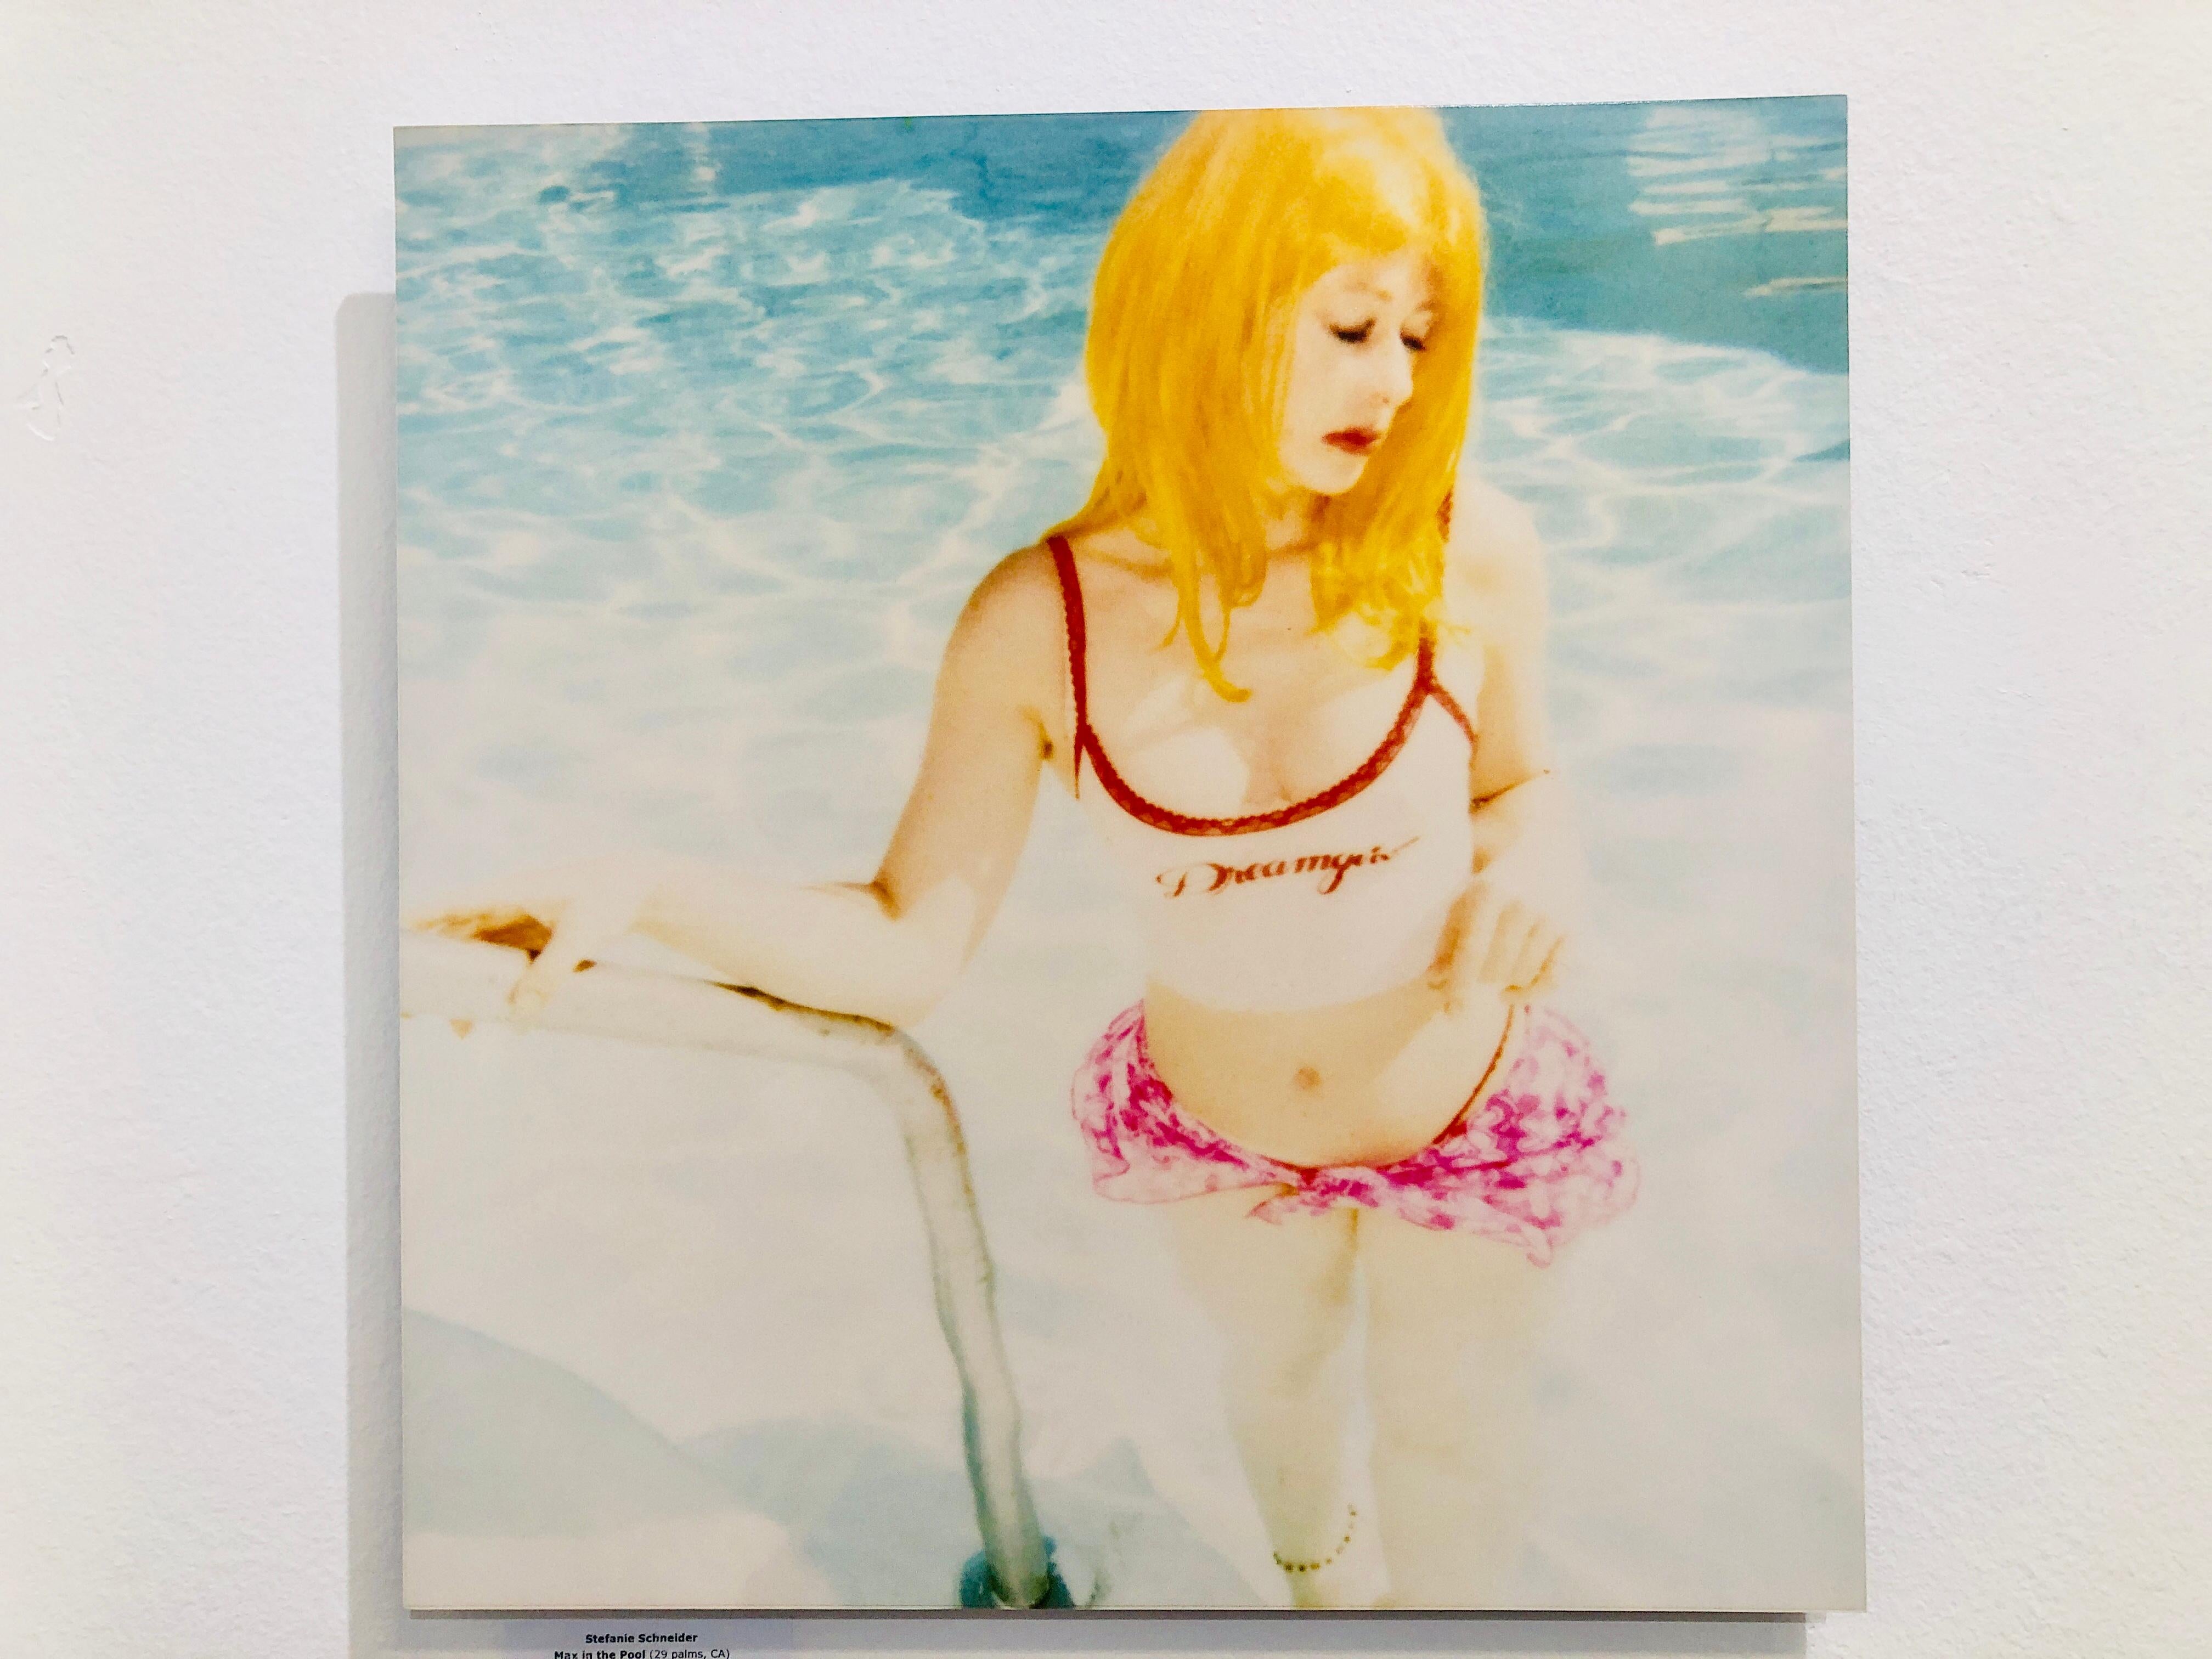 Max in Pool - Contemporary, Landscape, Figurative, expired, Polaroid, analog - Beige Color Photograph by Stefanie Schneider